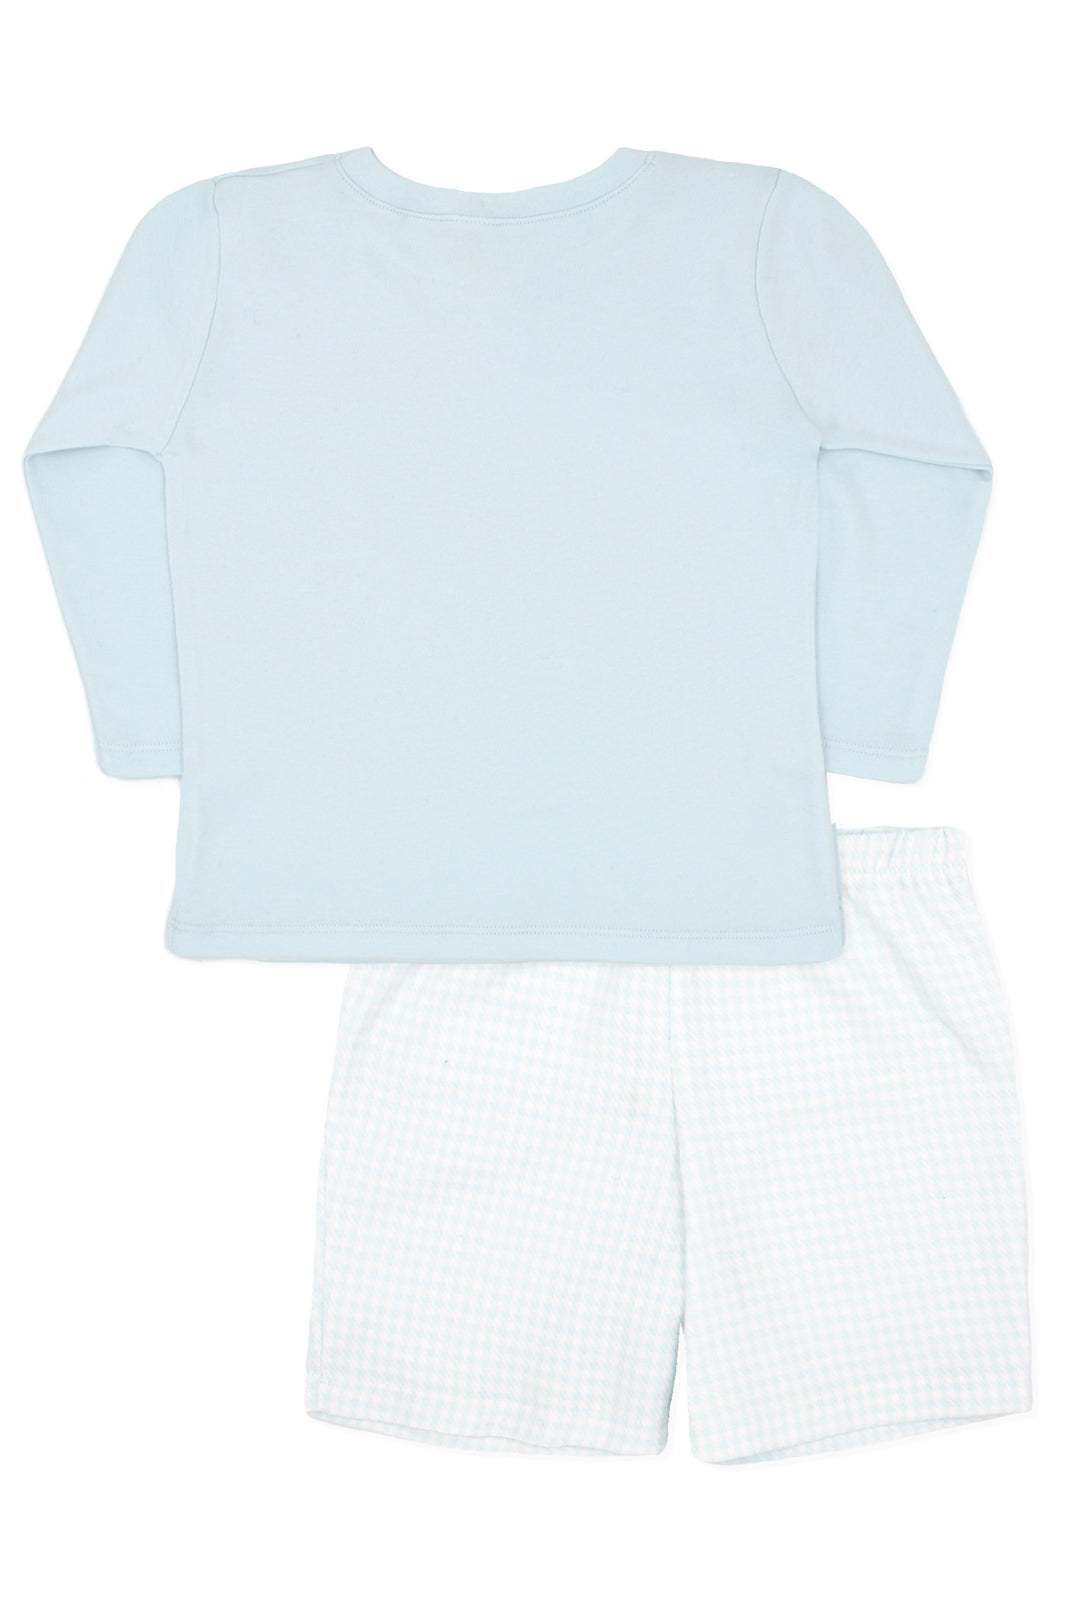 Rapife "Andreas" Blue Houndstooth Top & Shorts | Millie and John